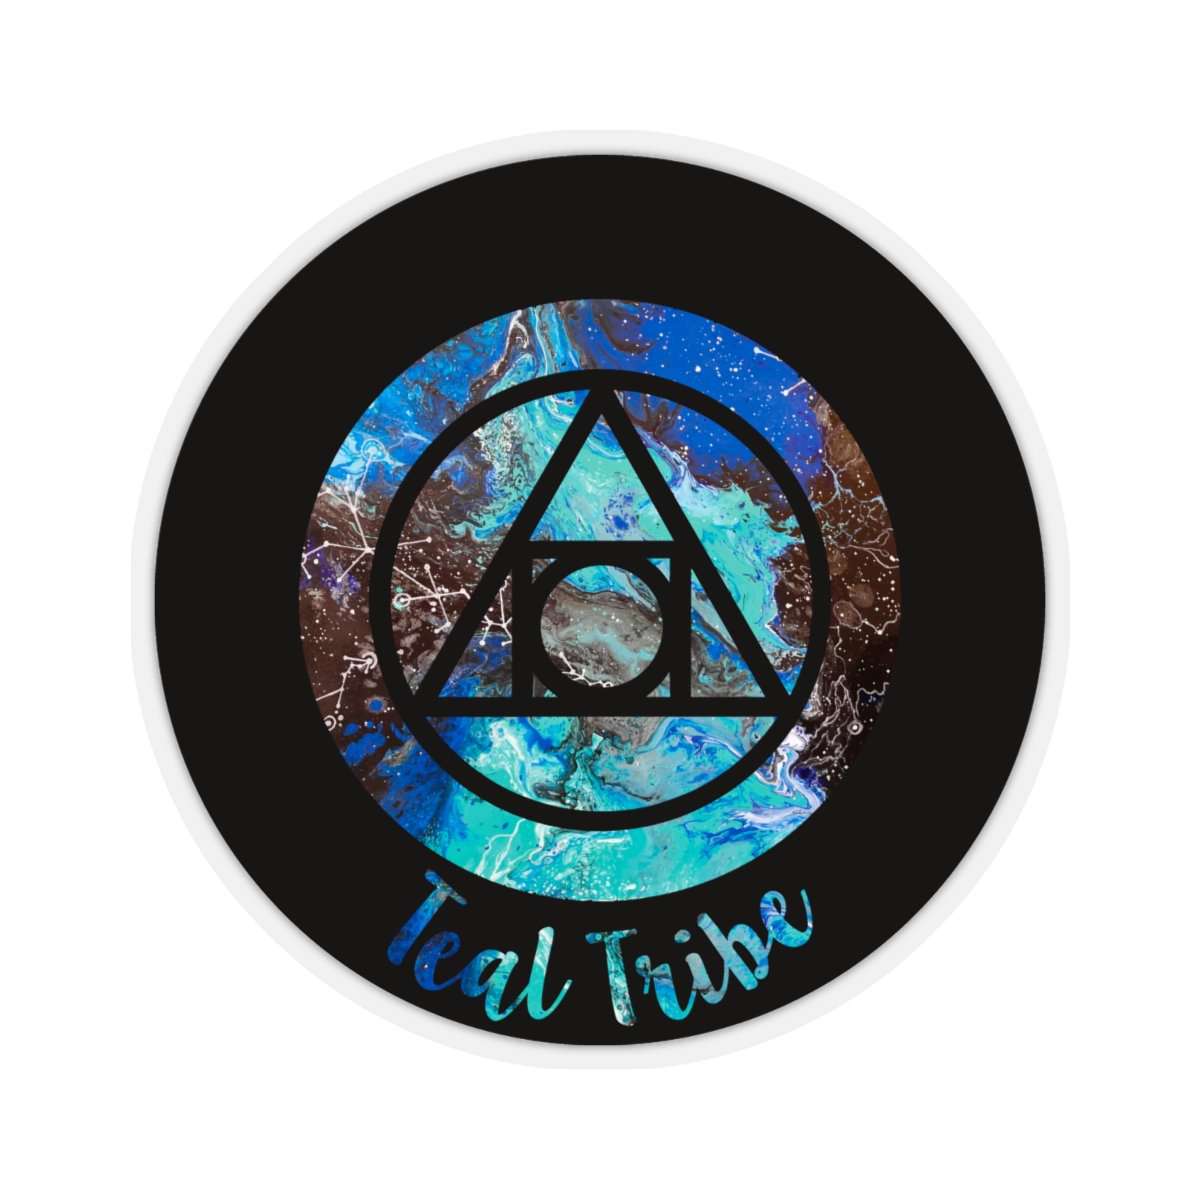 Teal Tribe Stickers